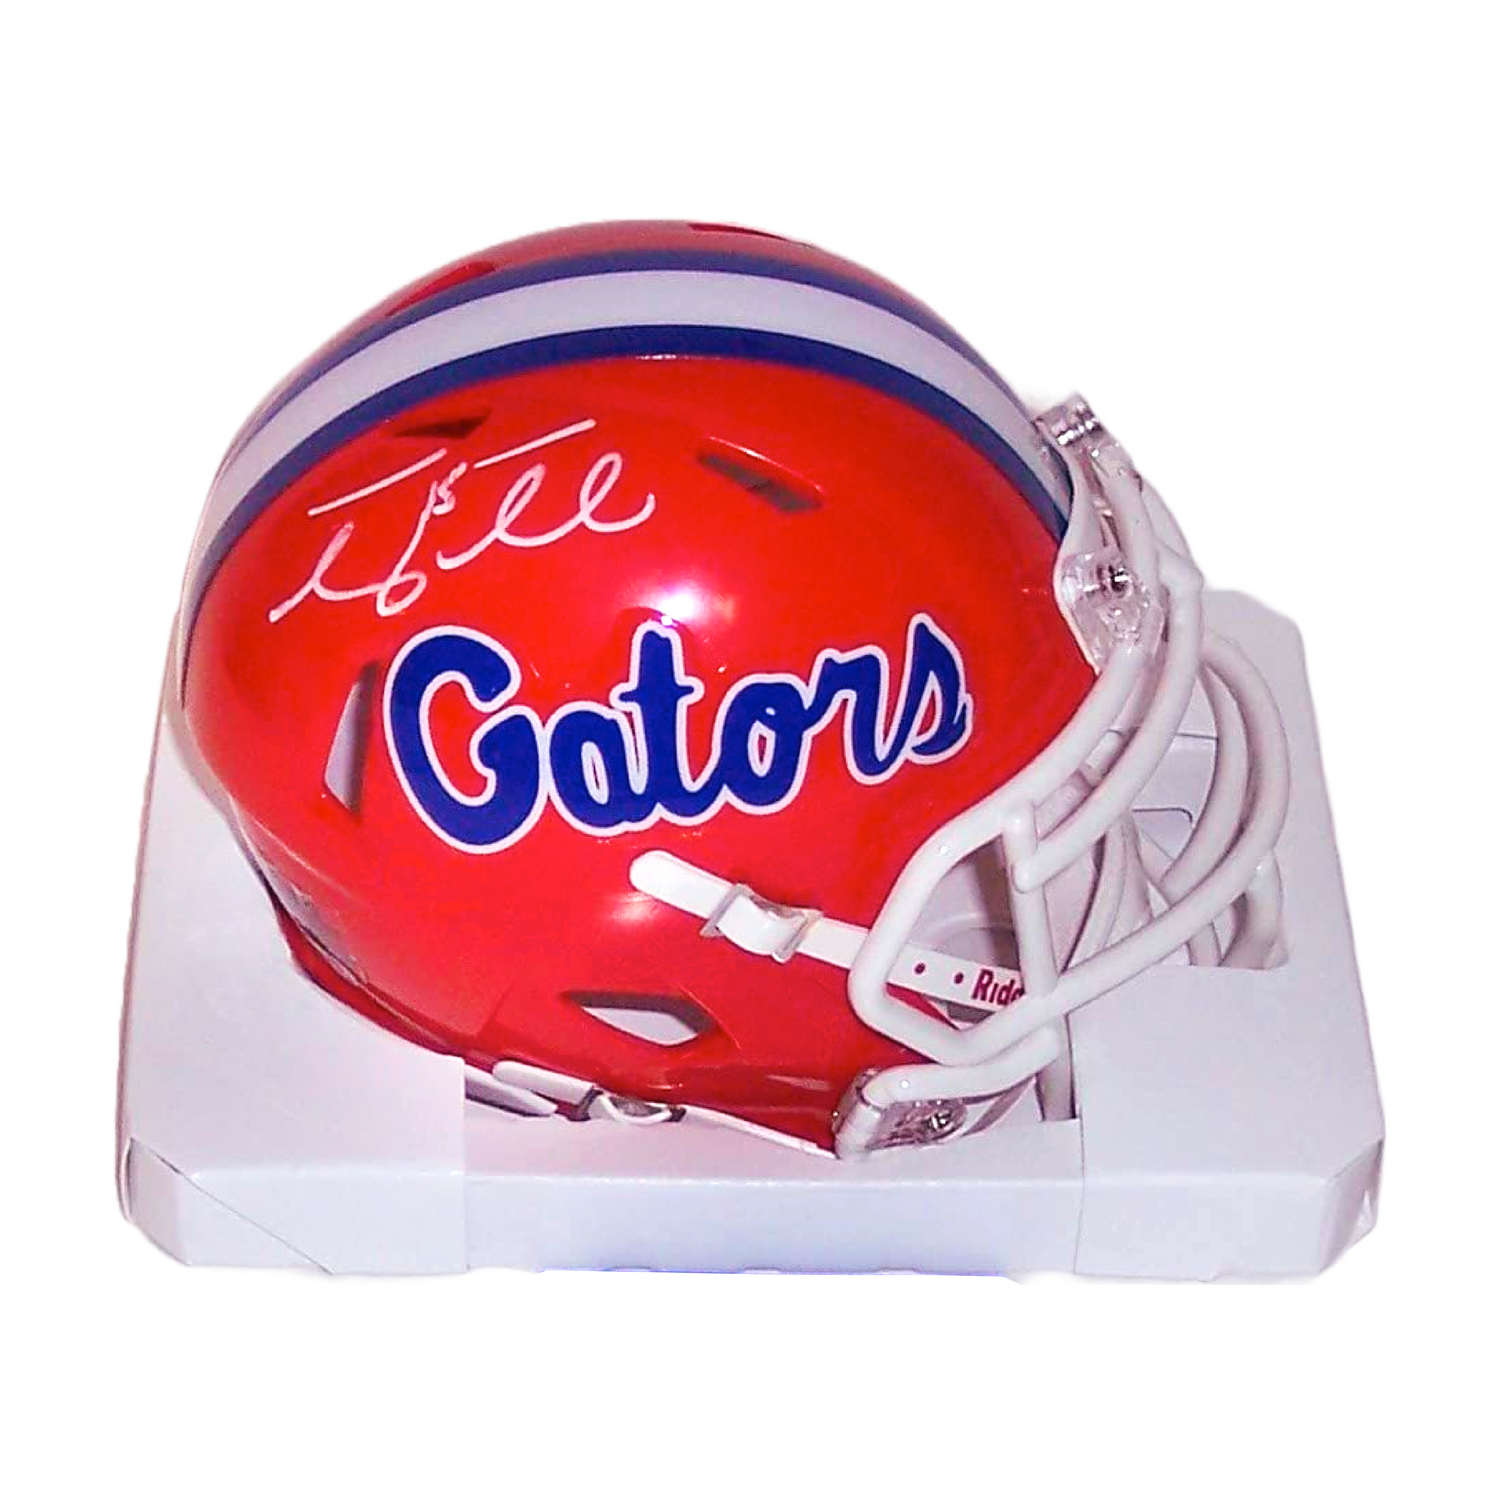 tim tebow autographed football